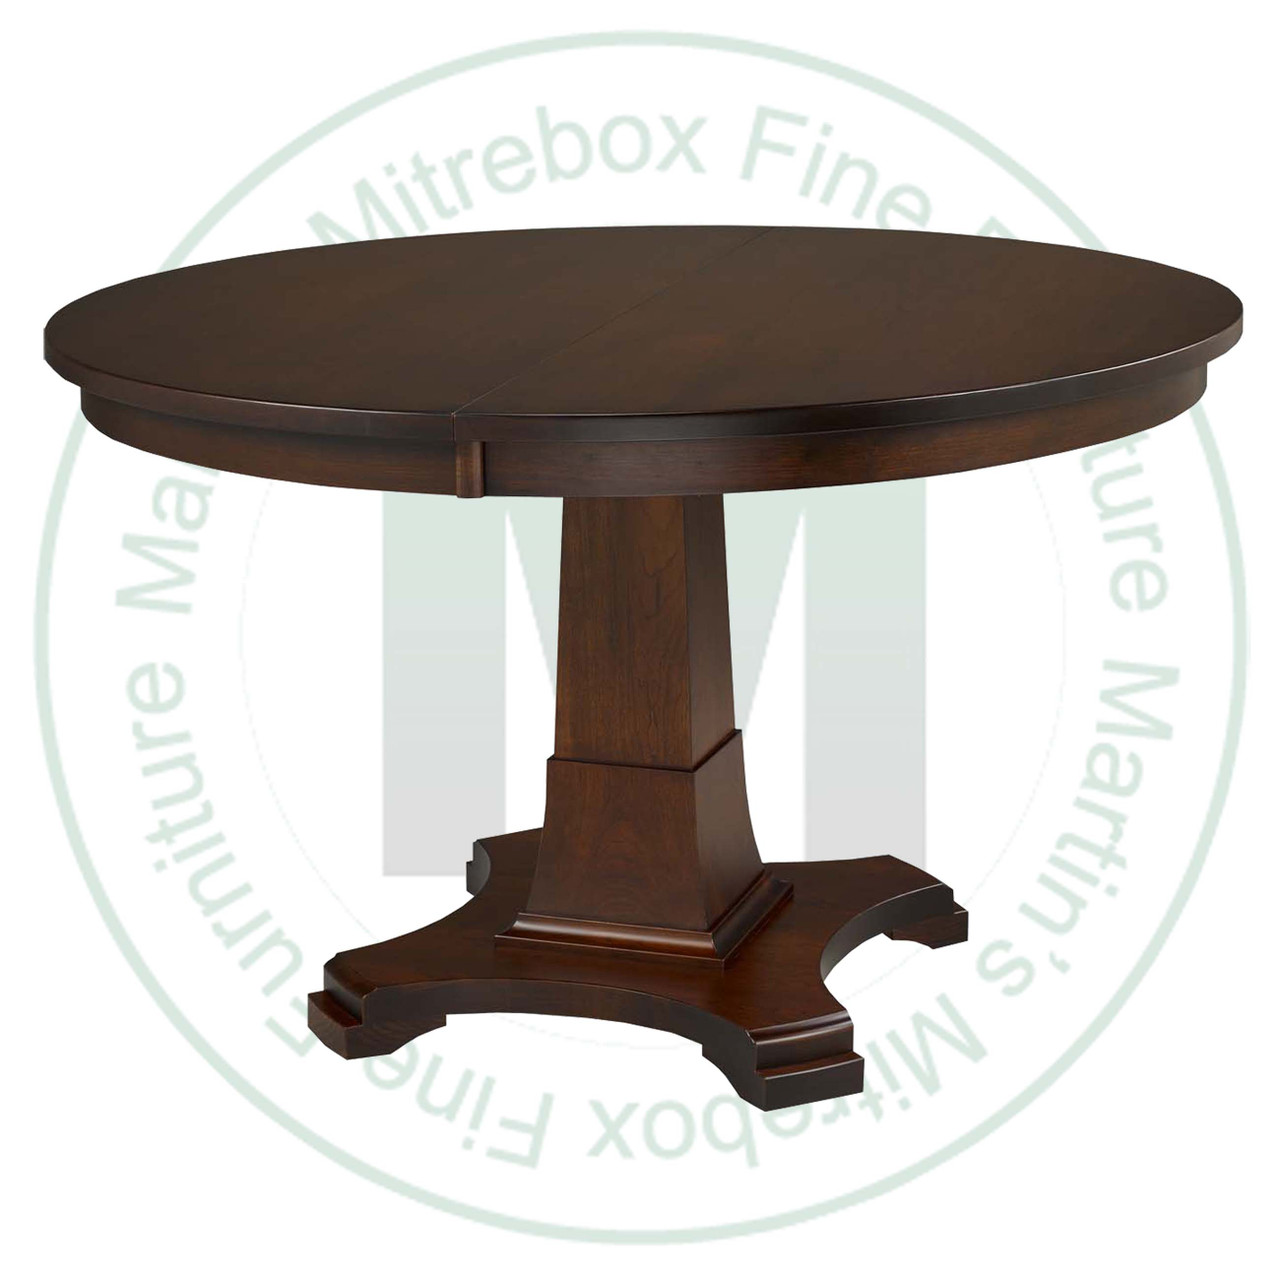 Oak Abbey Single Pedestal Table 42''D x 42''W x 30''H With 1 - 12'' Leaf. Table Has 1'' Thick Top